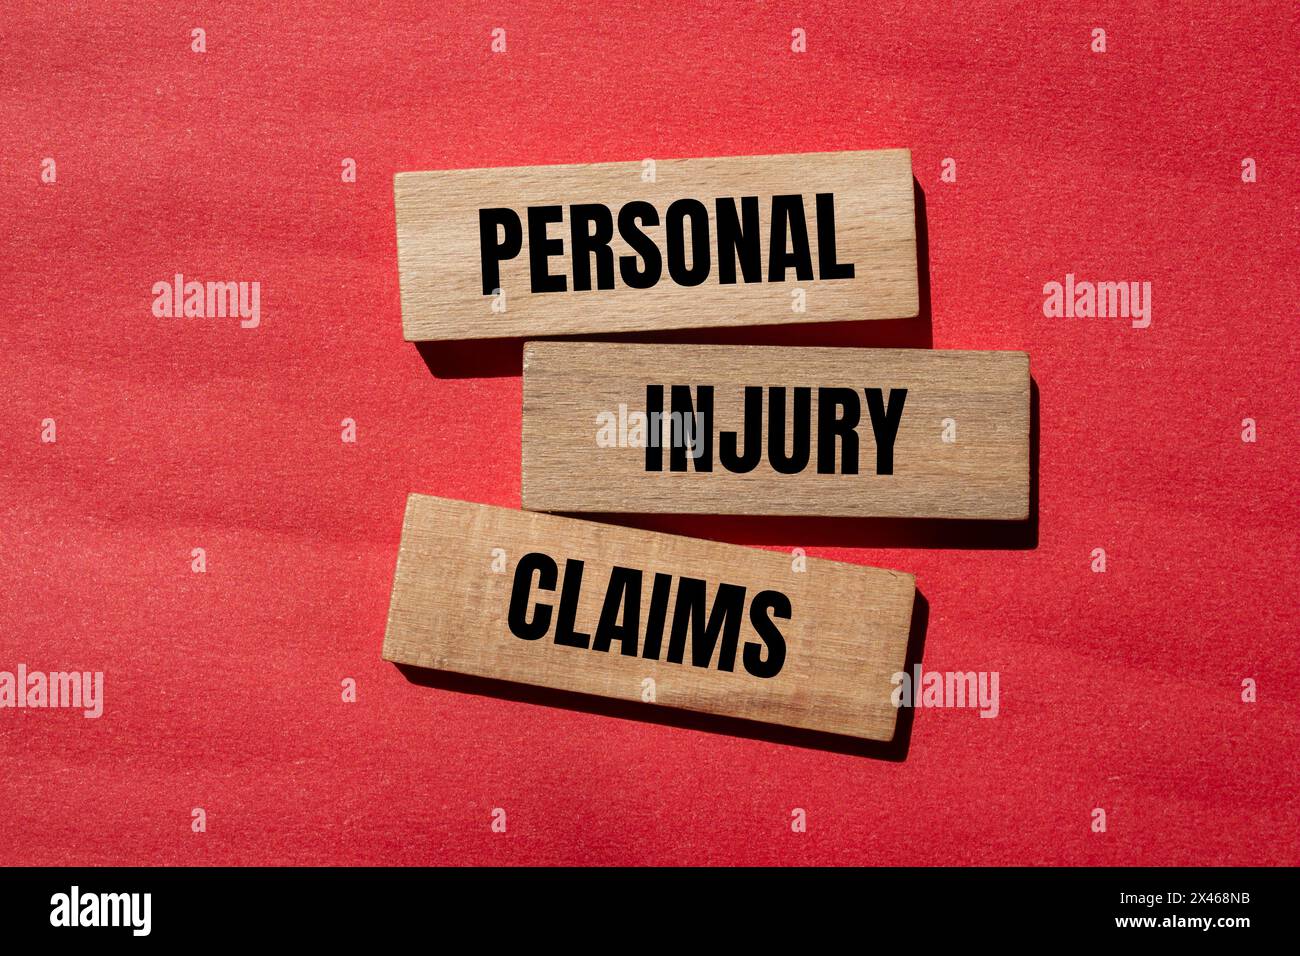 Personal injury claims written on wooden blocks with red background. Conceptual personal injury claims symbol. Copy space. Stock Photo